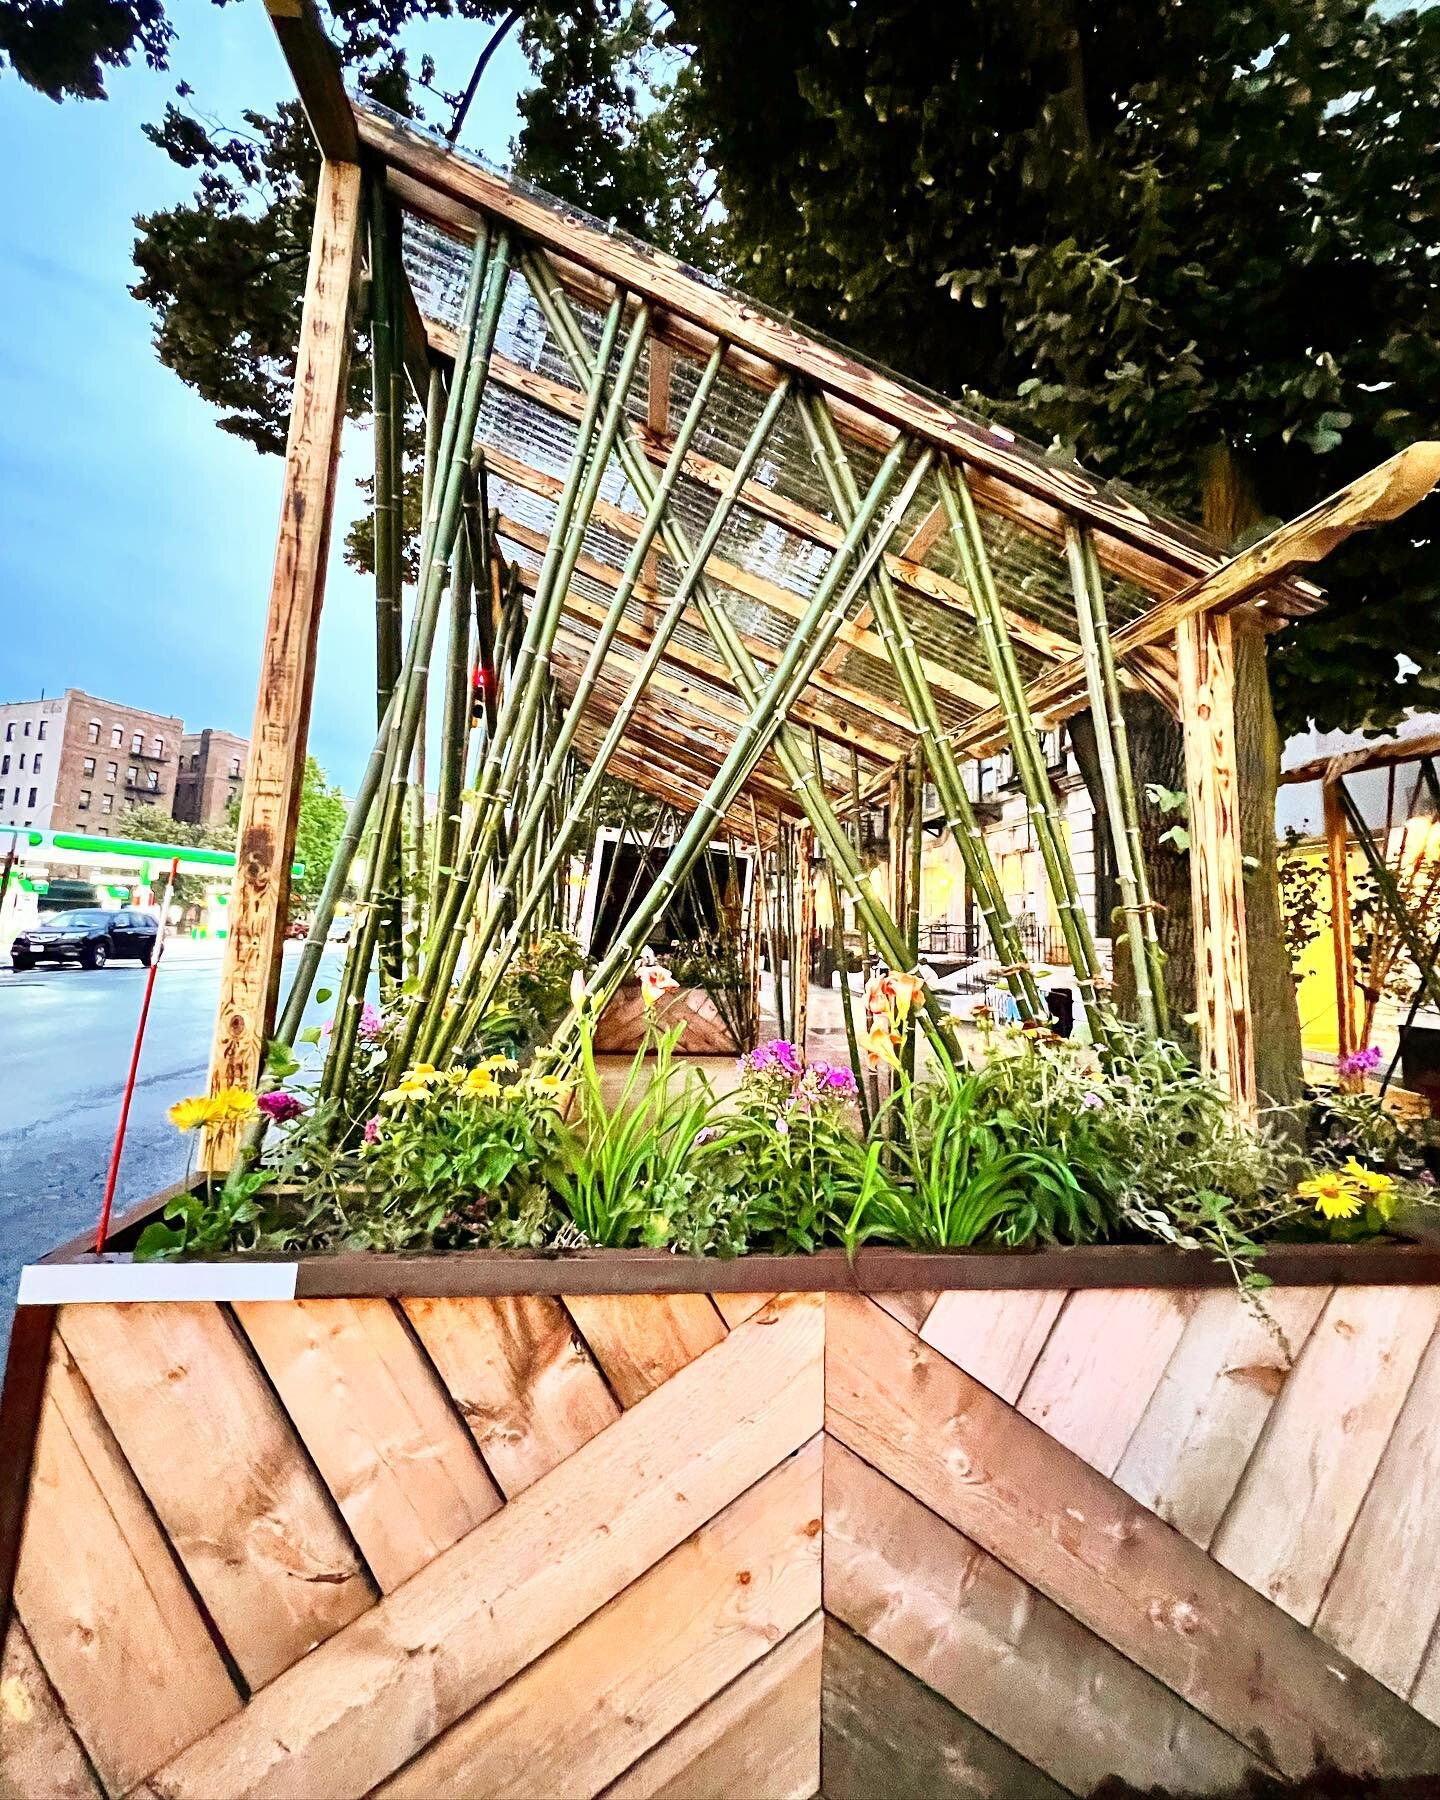 🌾🌱Streetside Garden🌱🌾 Built for @gaianomaya , we have been steadily filling with our aesthetic from wall artworks to lighting fixtures. This week we built this pergola and garden boxes with bee friendly flowers and herbs. The Bamboo was harvested